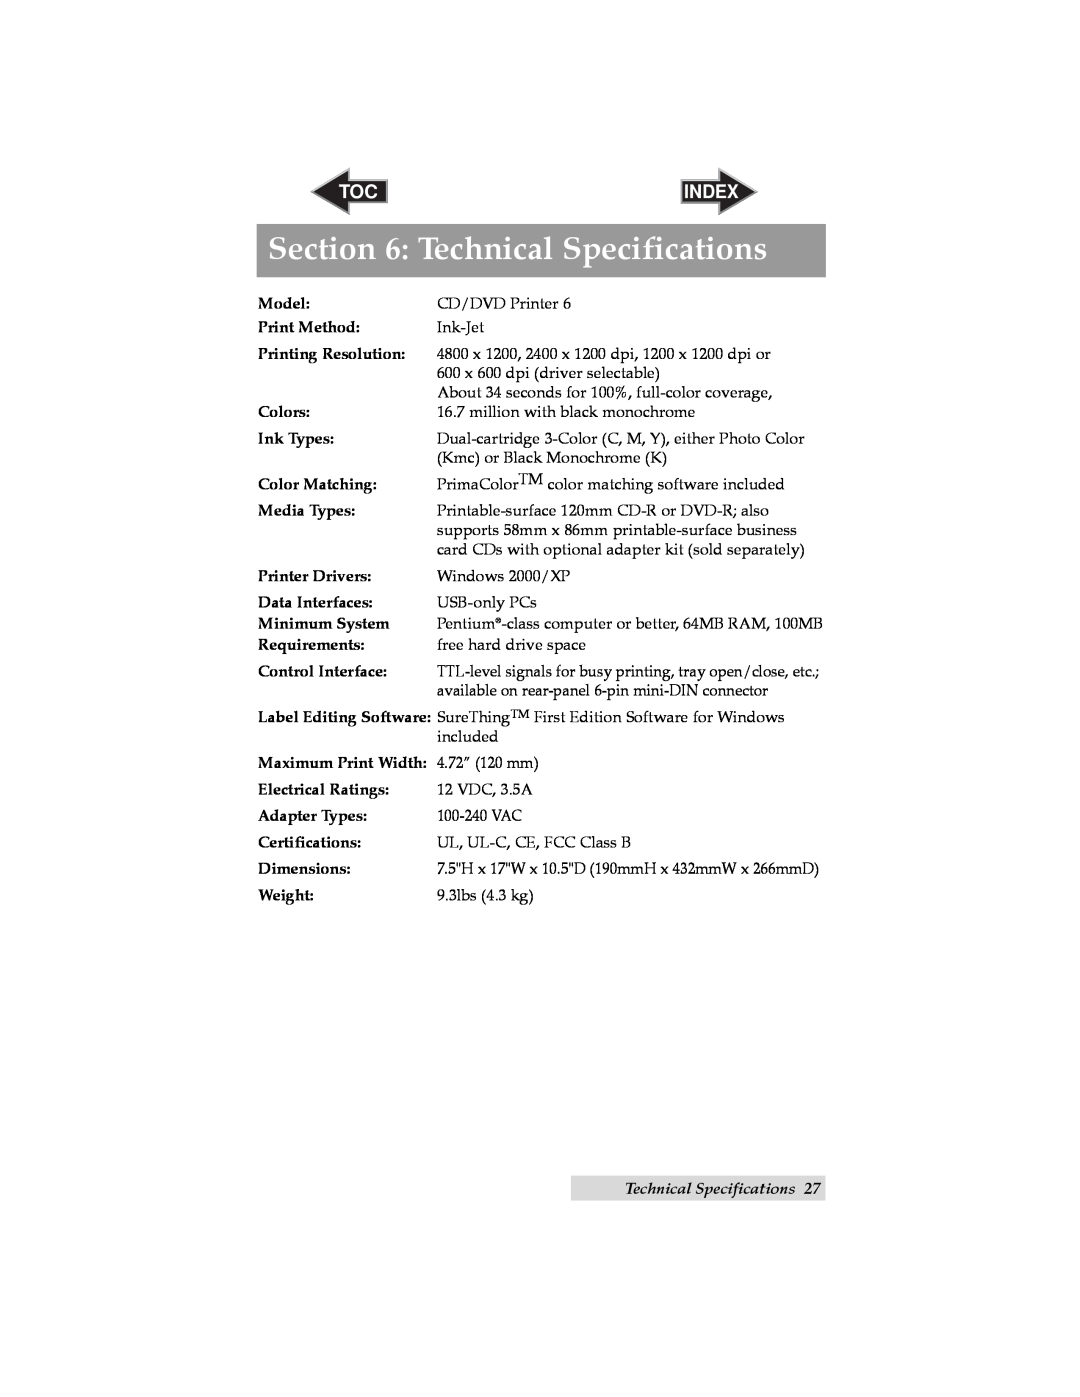 Primera Technology 6 user manual Technical Specifications, Index 